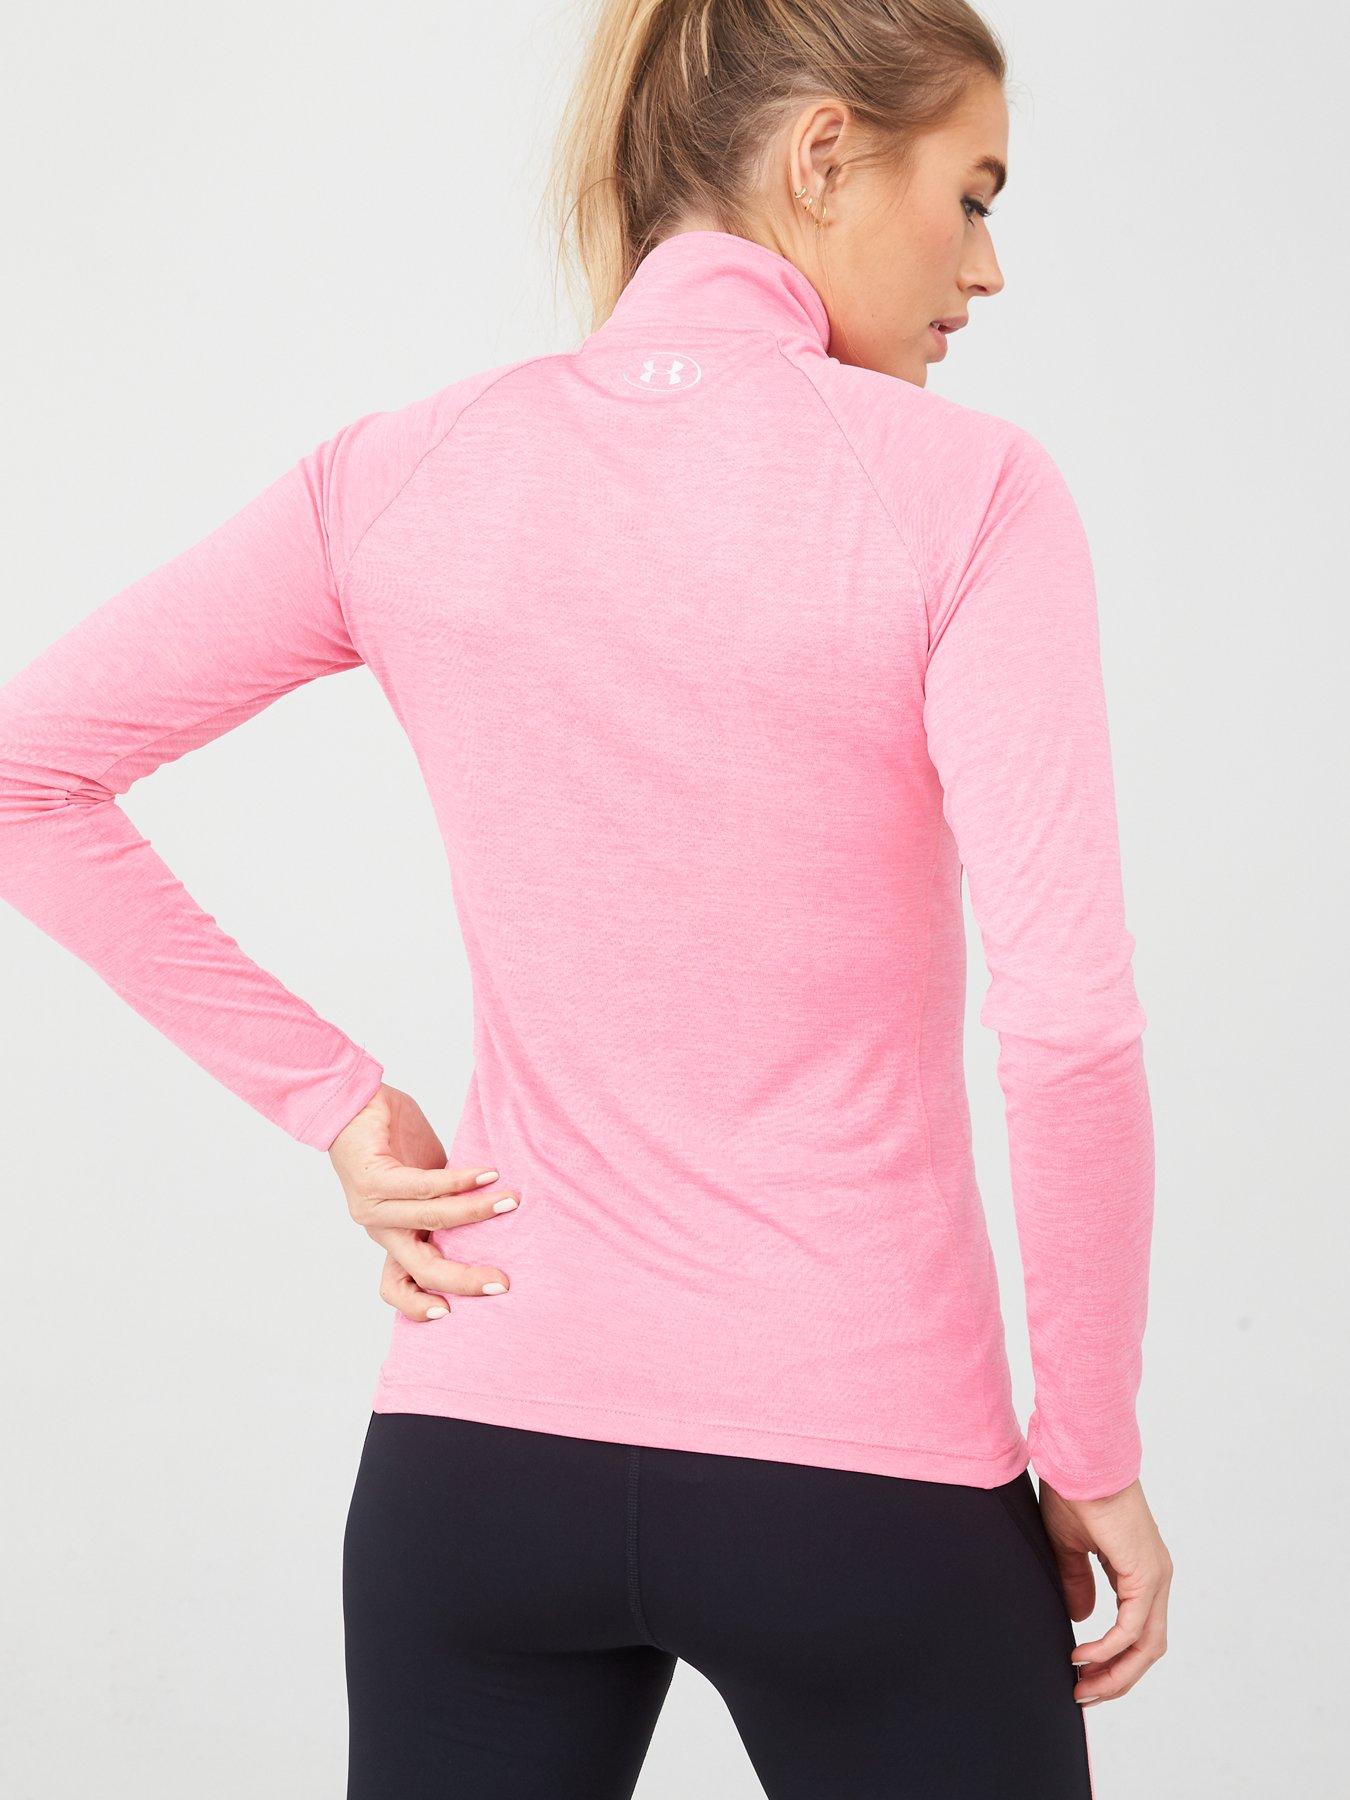 pink under armour top